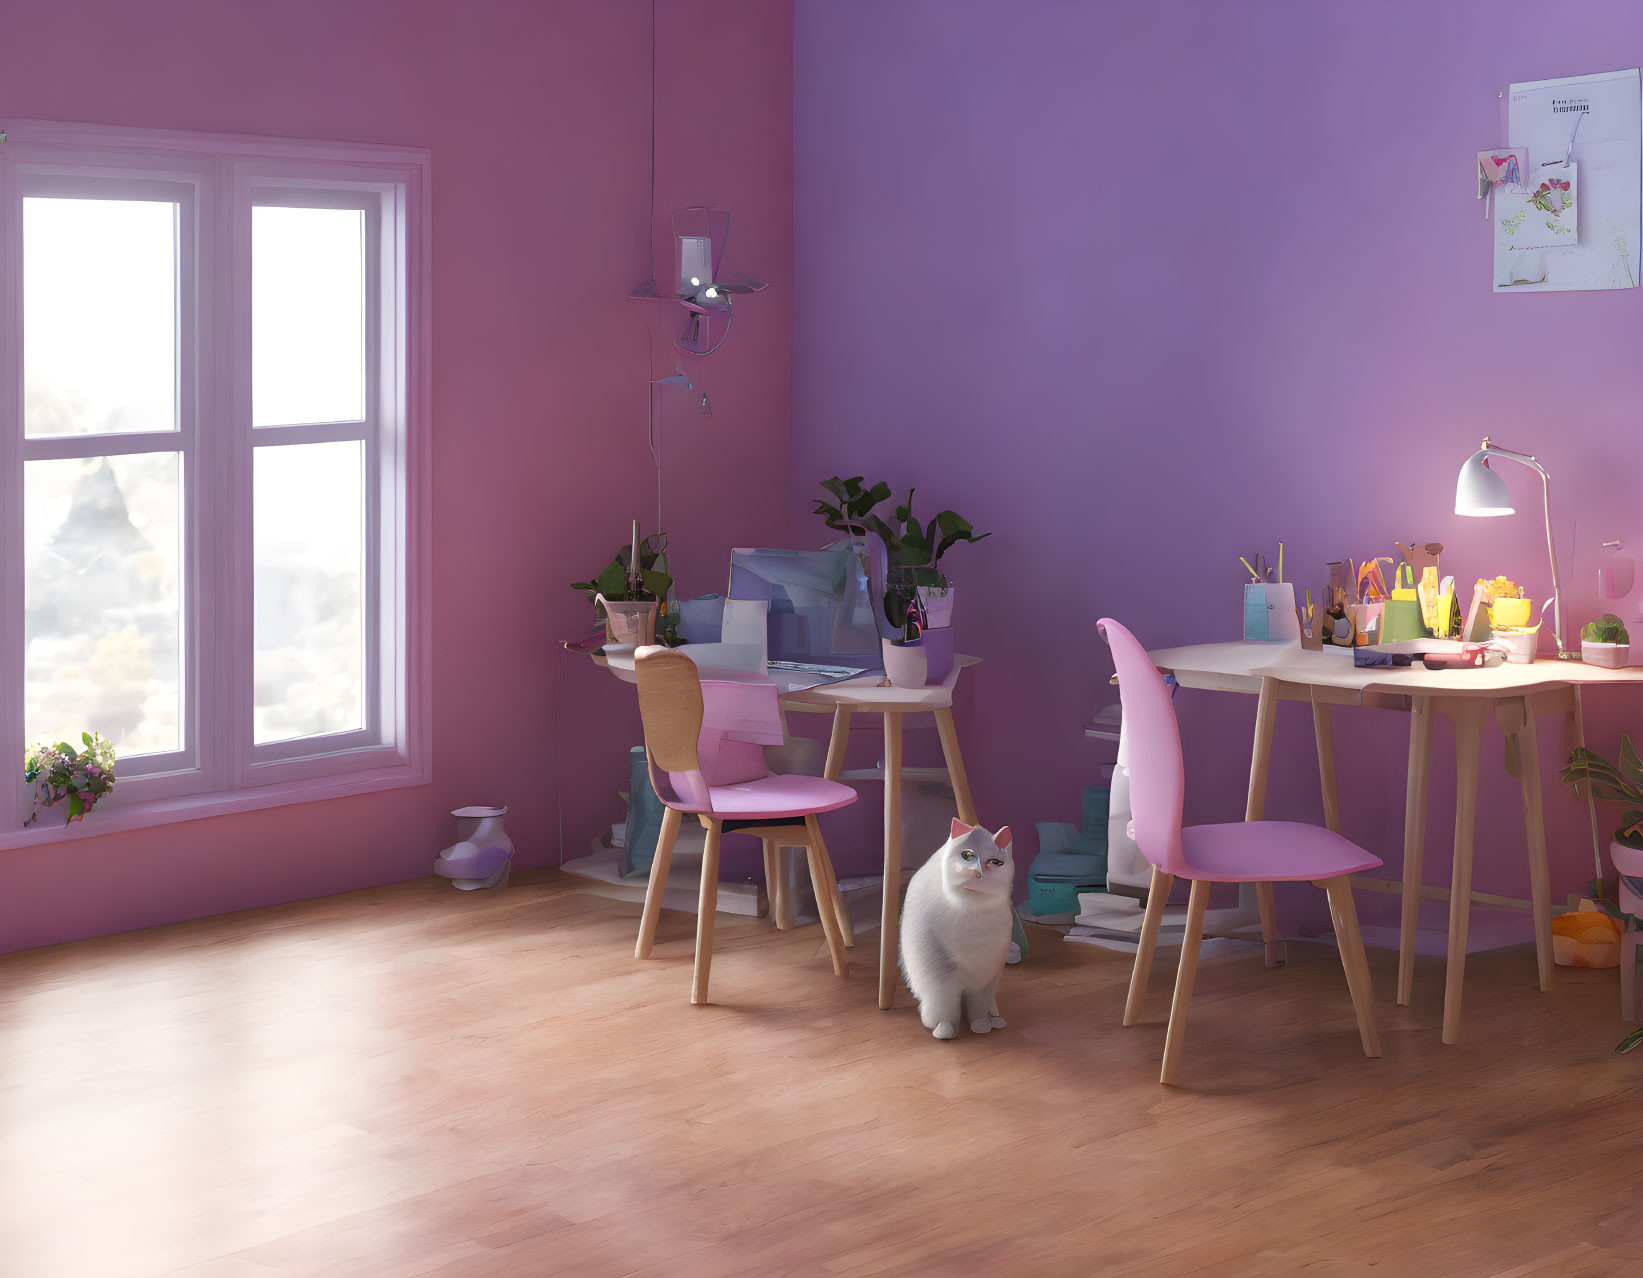 Purple-themed Room with Cat, Art Supplies, and Window